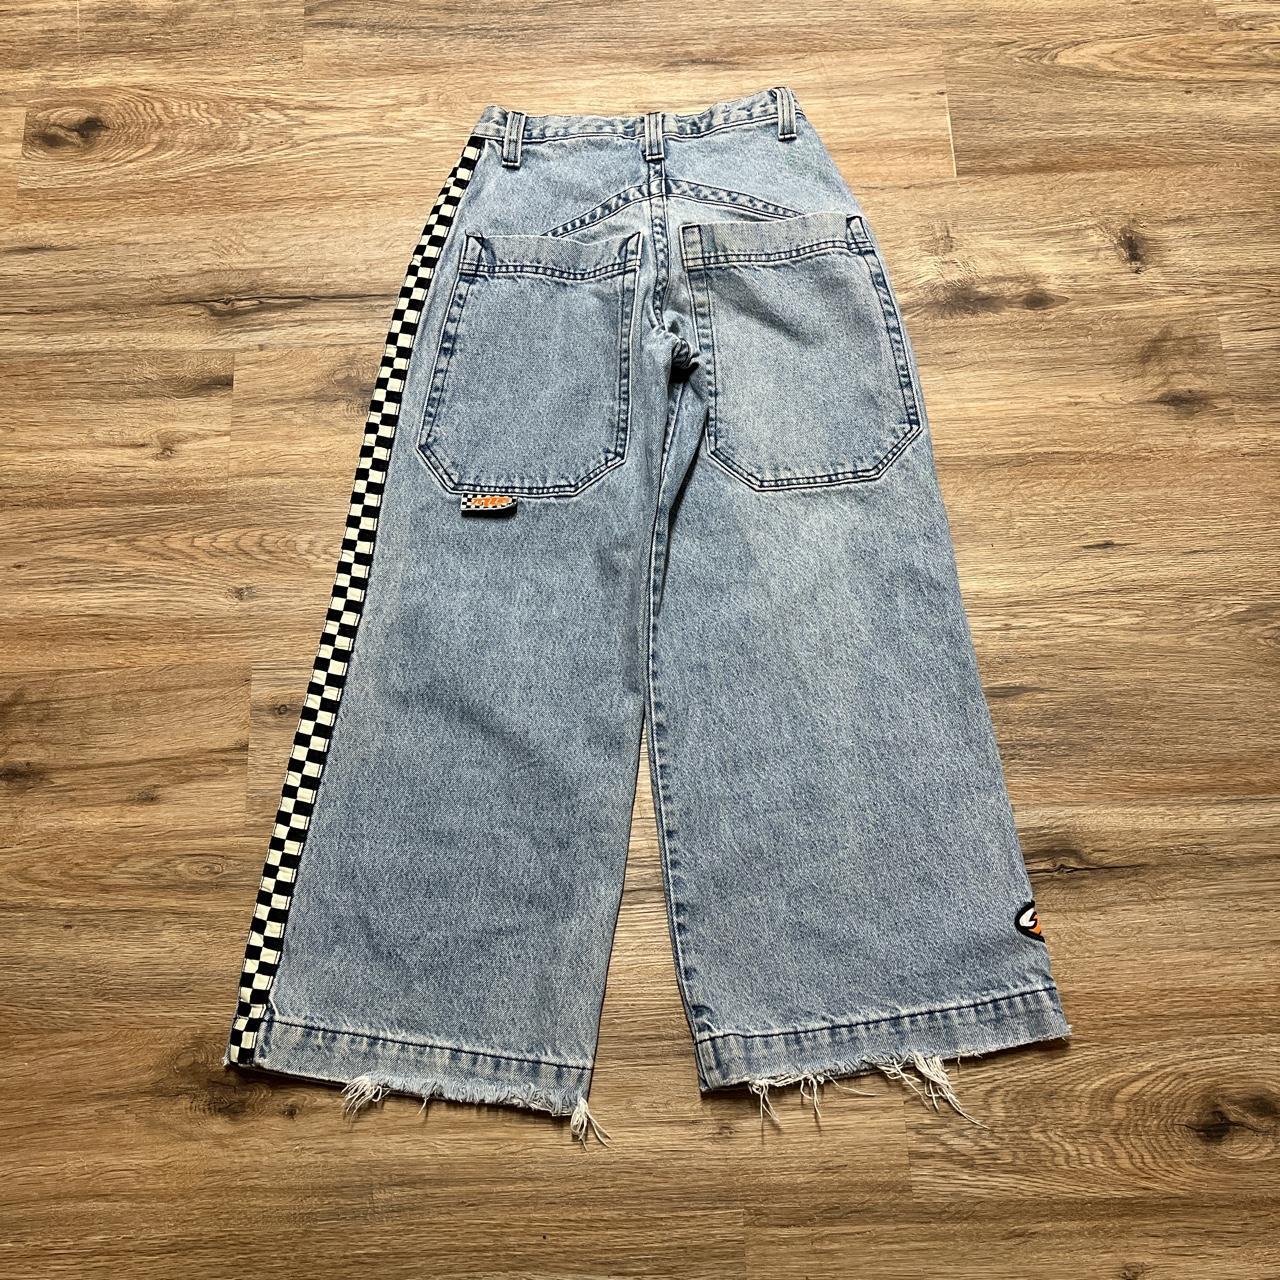 JNCO Women's Blue and White Jeans | Depop